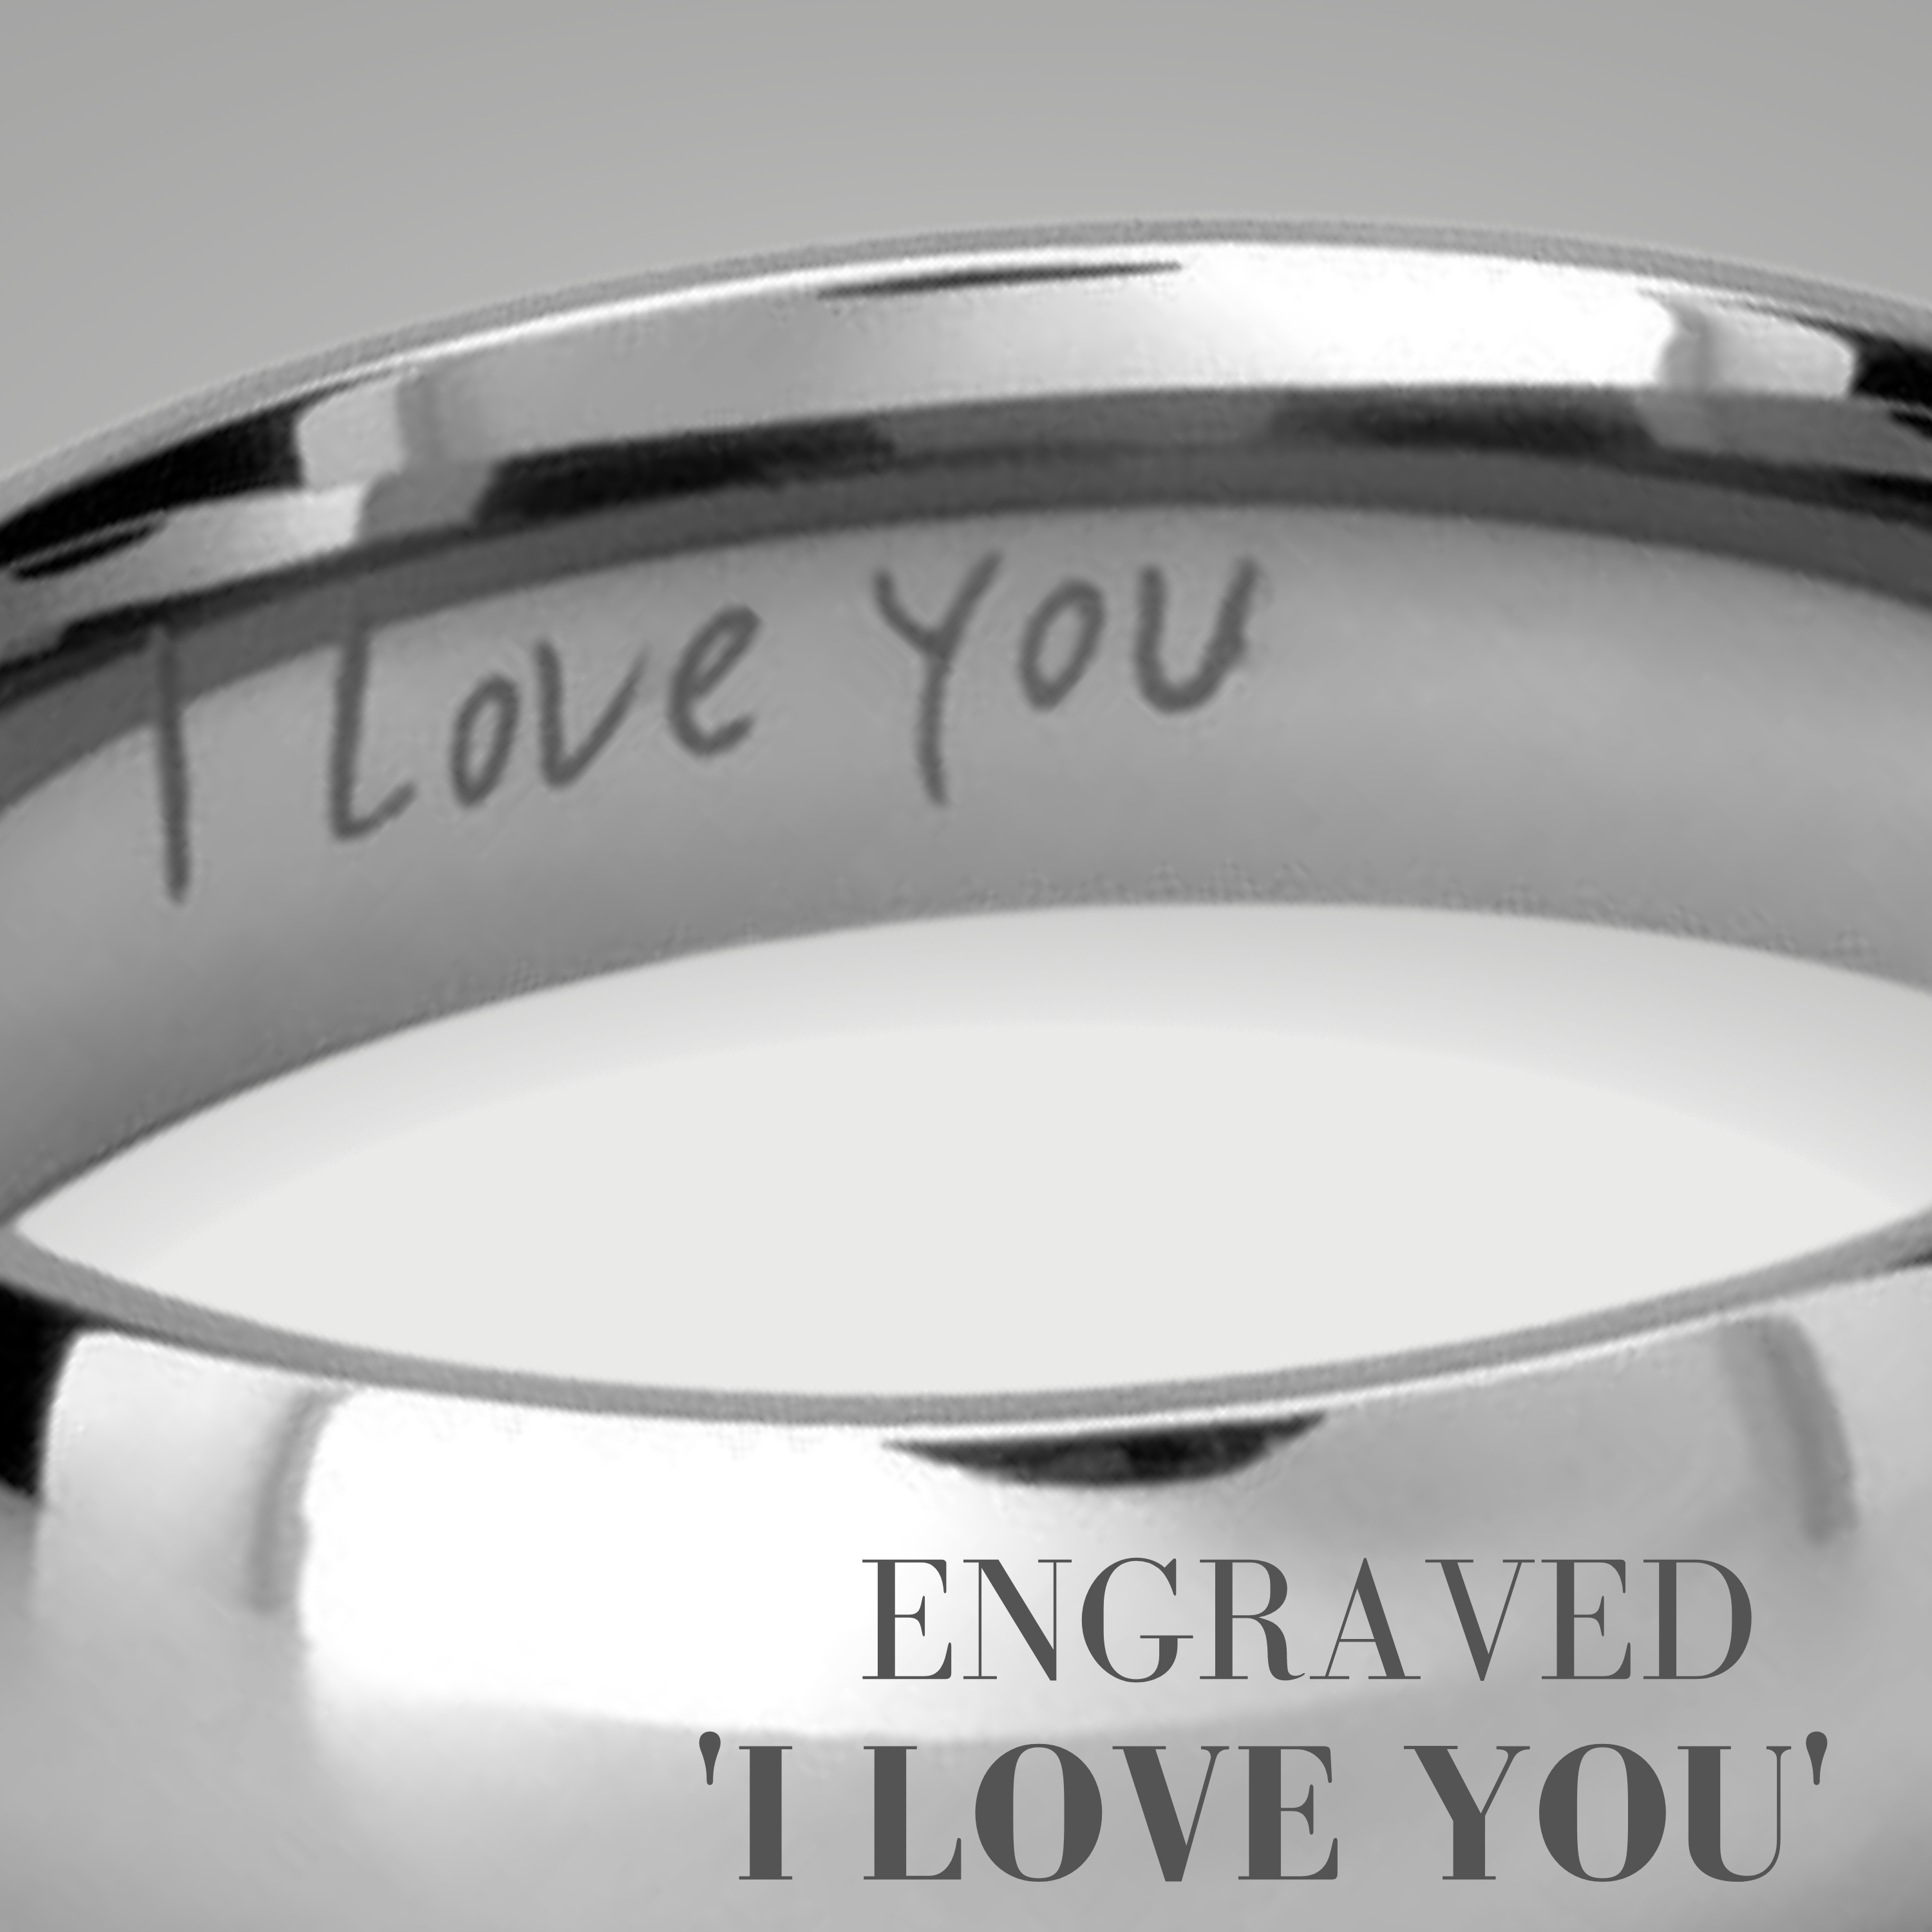 BESTTOHAVE Mens Titanium Ring - 8mm Wide - Engraved Inside With I Love You  Classic Unisex Wedding Engagement Comfort Fit Jewellery Band Ring - Size L  : BestToHave: Amazon.co.uk: Fashion